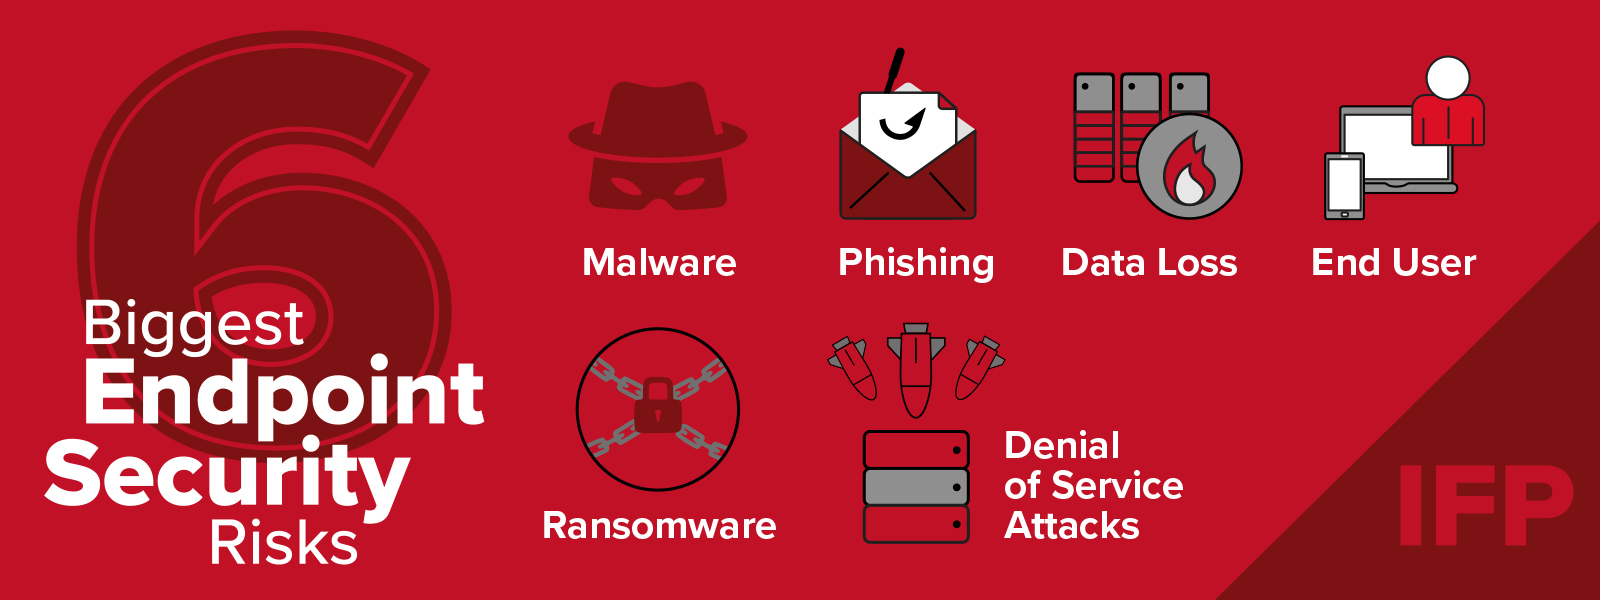 IFP visual on the biggest endpoint security risks for enterprises